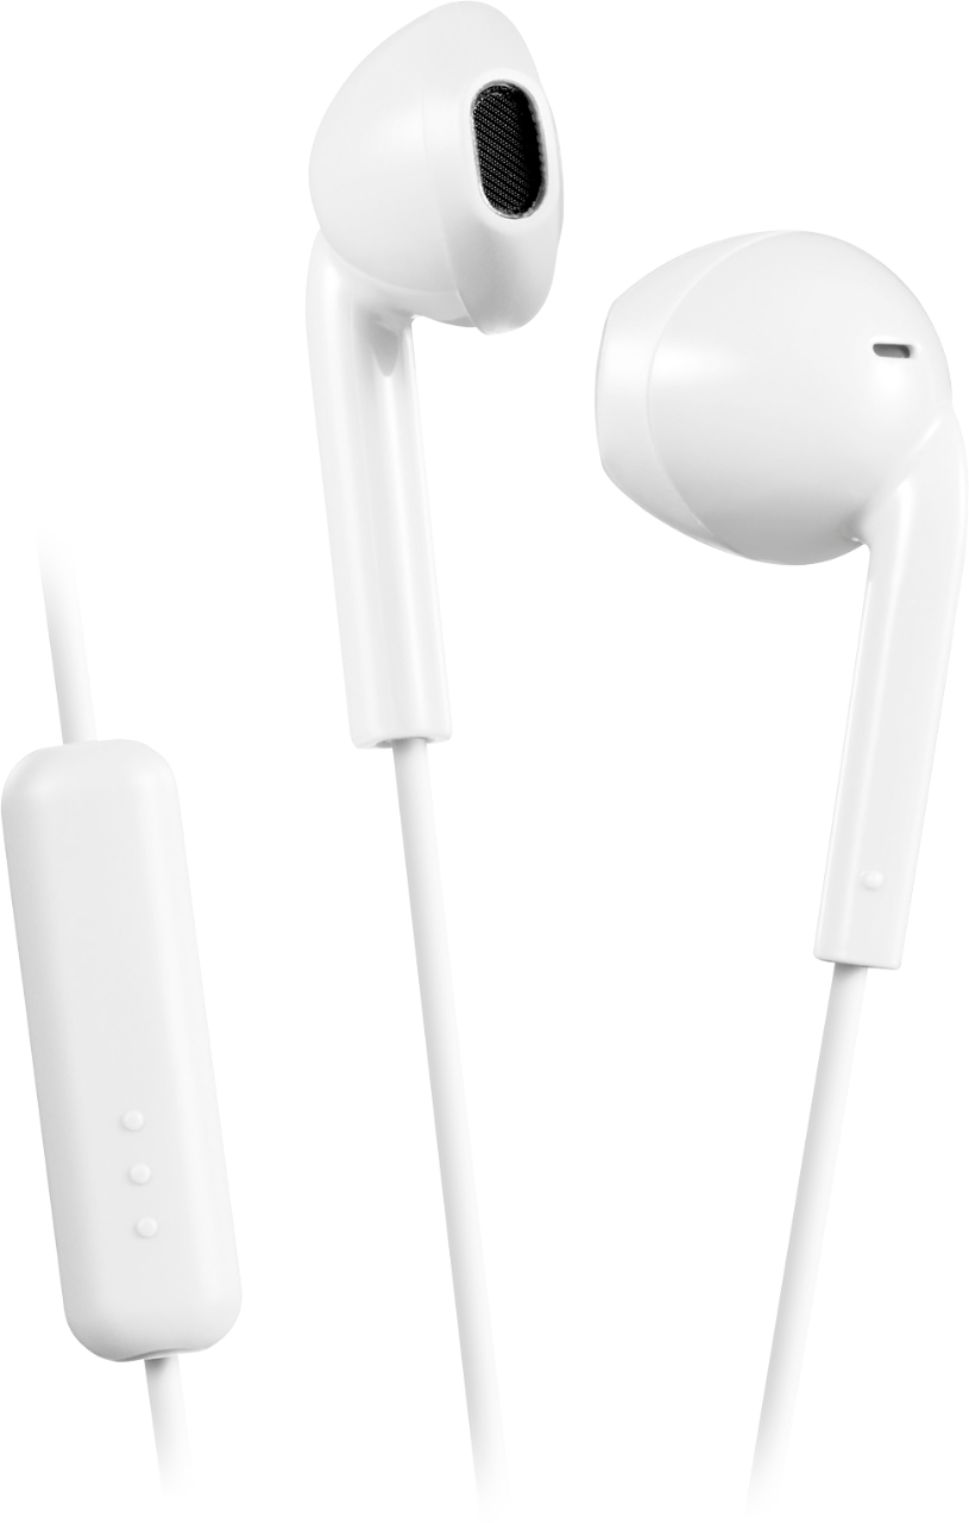 Angle View: JVC - Wired Earbud with Microphone and Remote - White